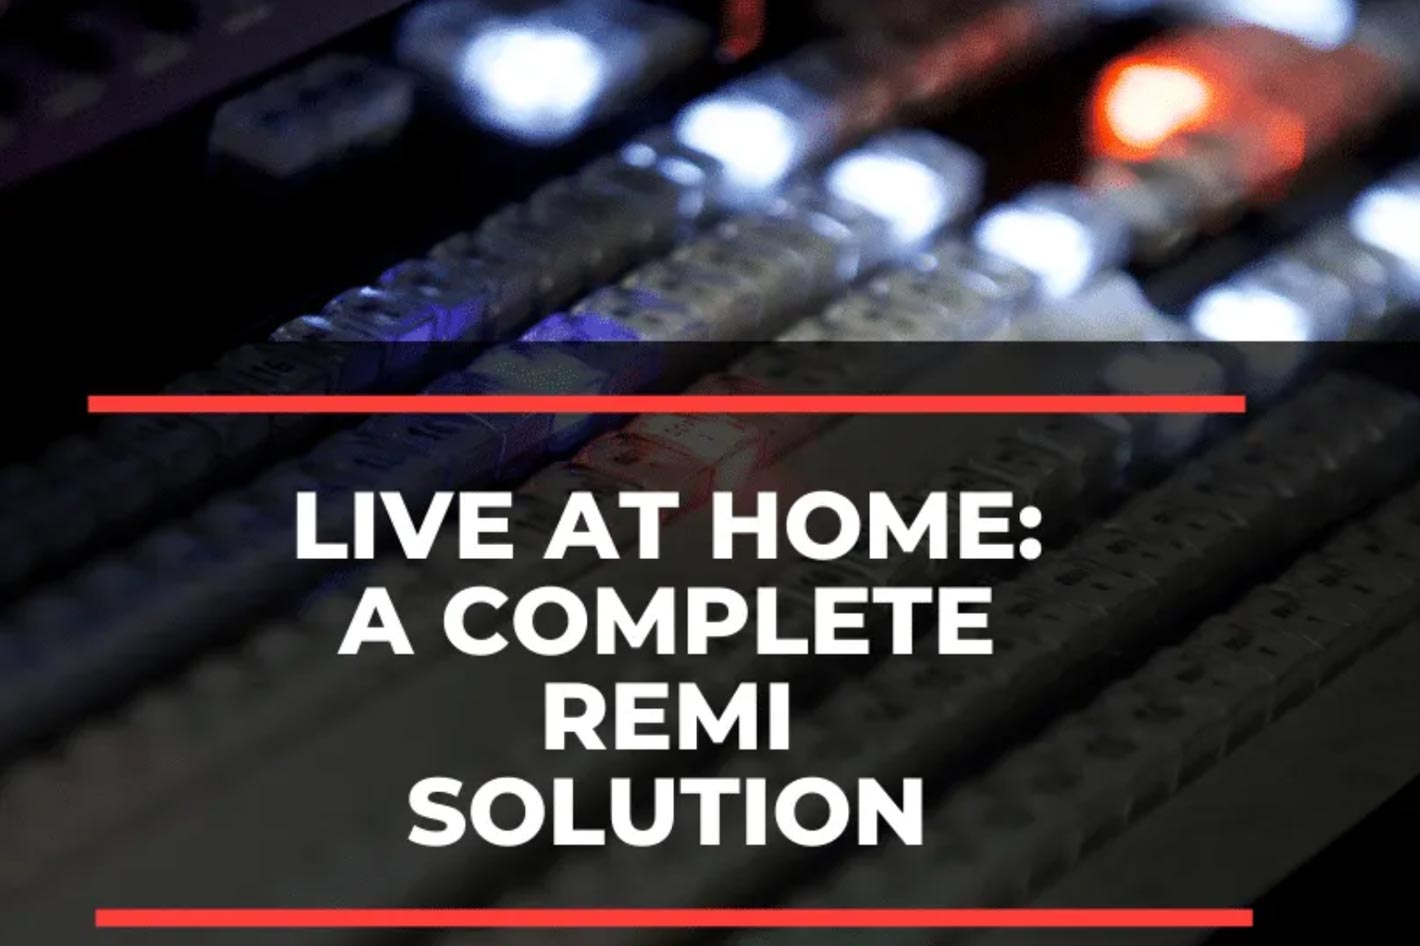 BMG’s REMI: a Live At Home solution for pandemic times